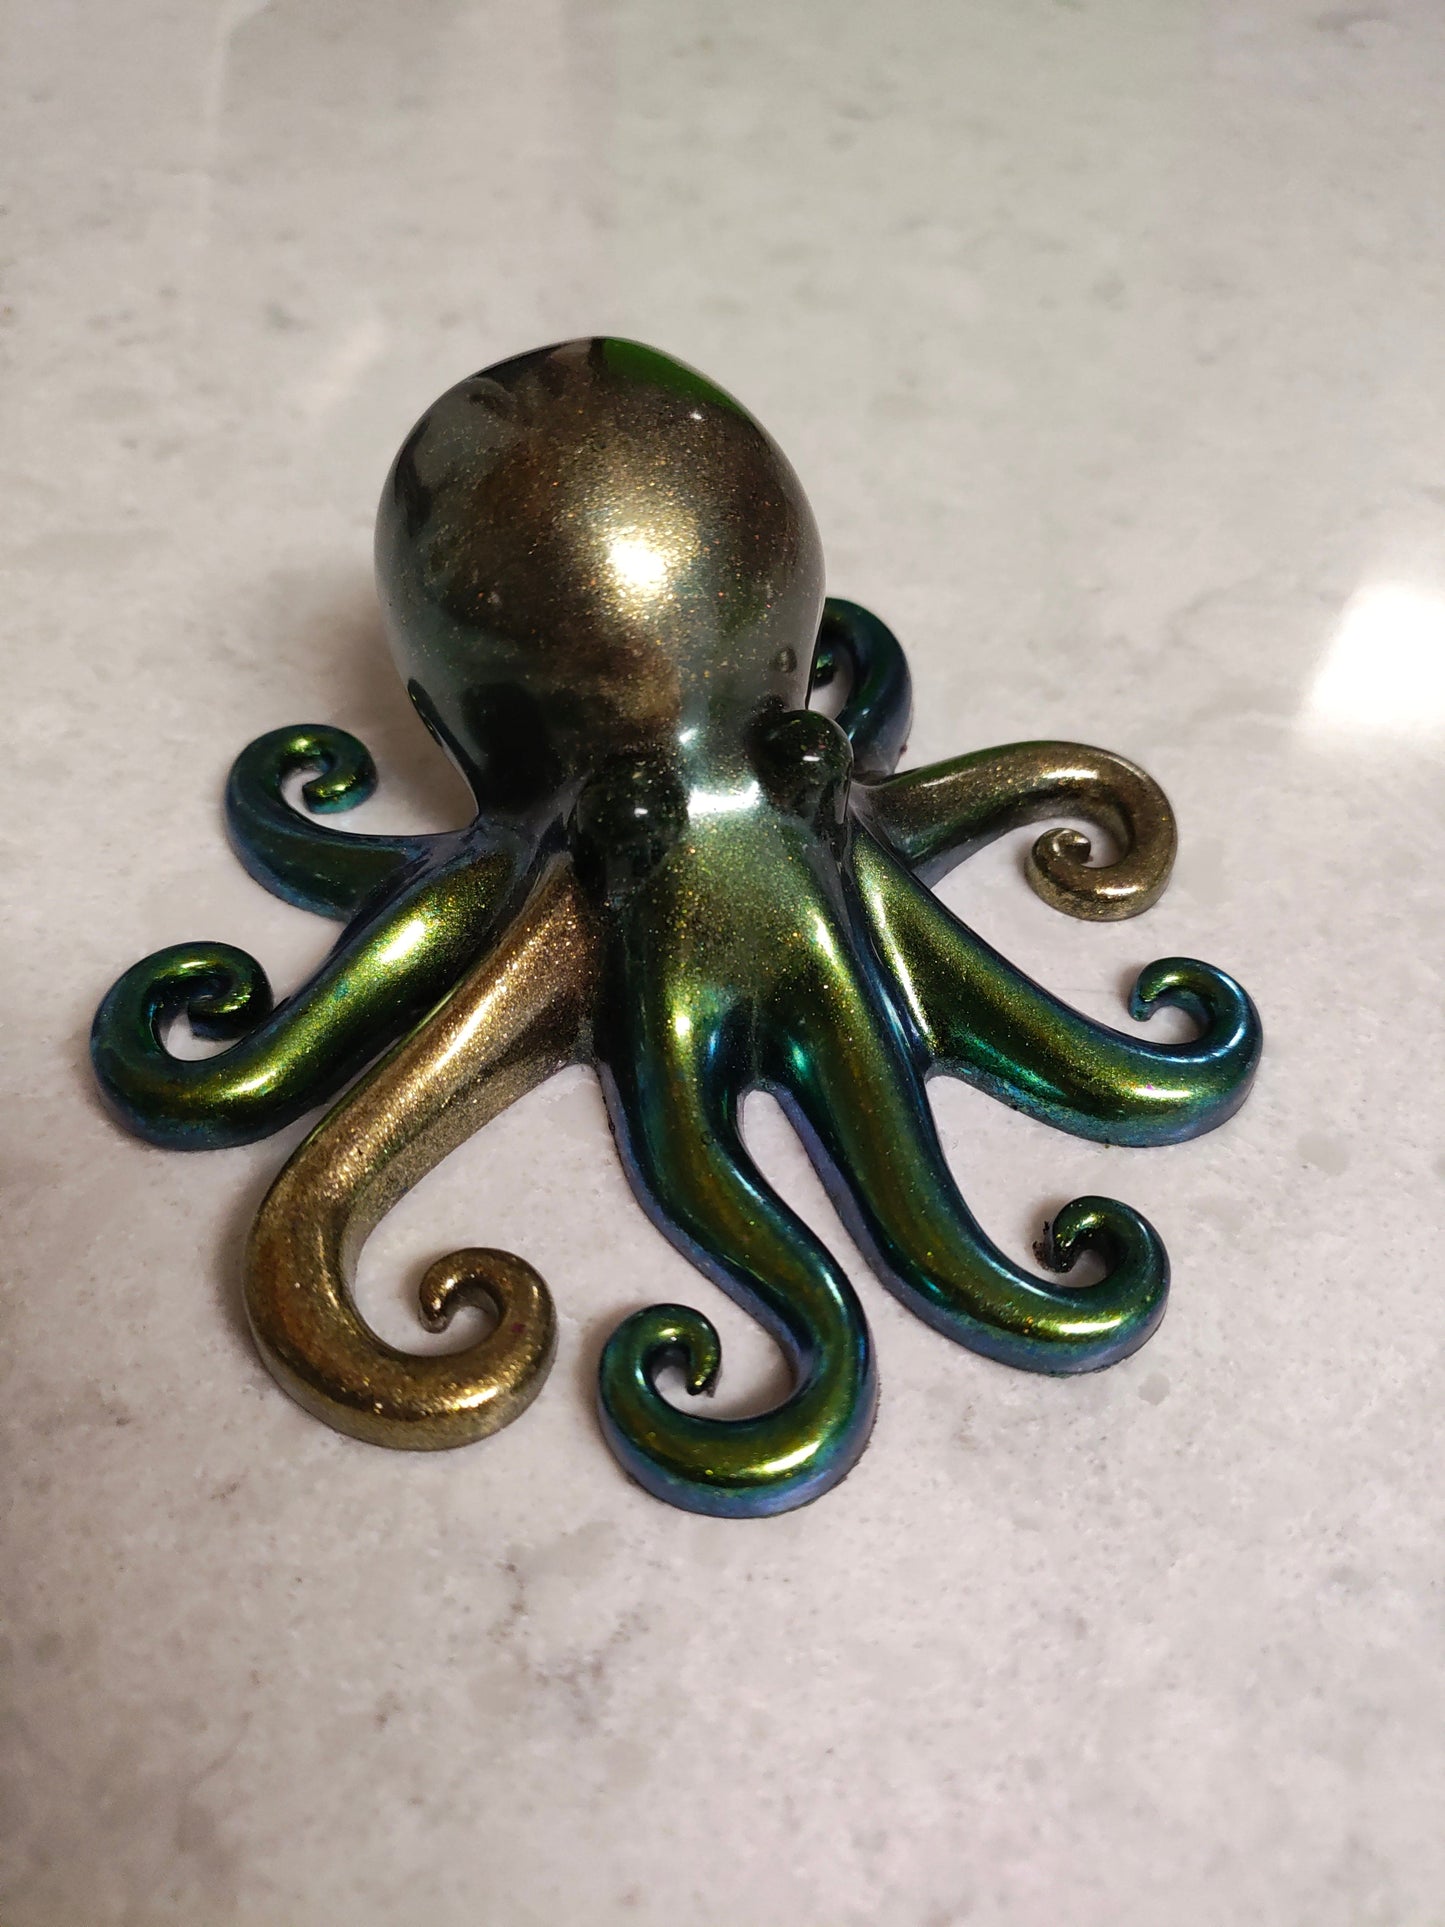 Artisan Hand Crafted Epoxy Resin Octopus Decor - Accent - Knick Knack - Paper Weight